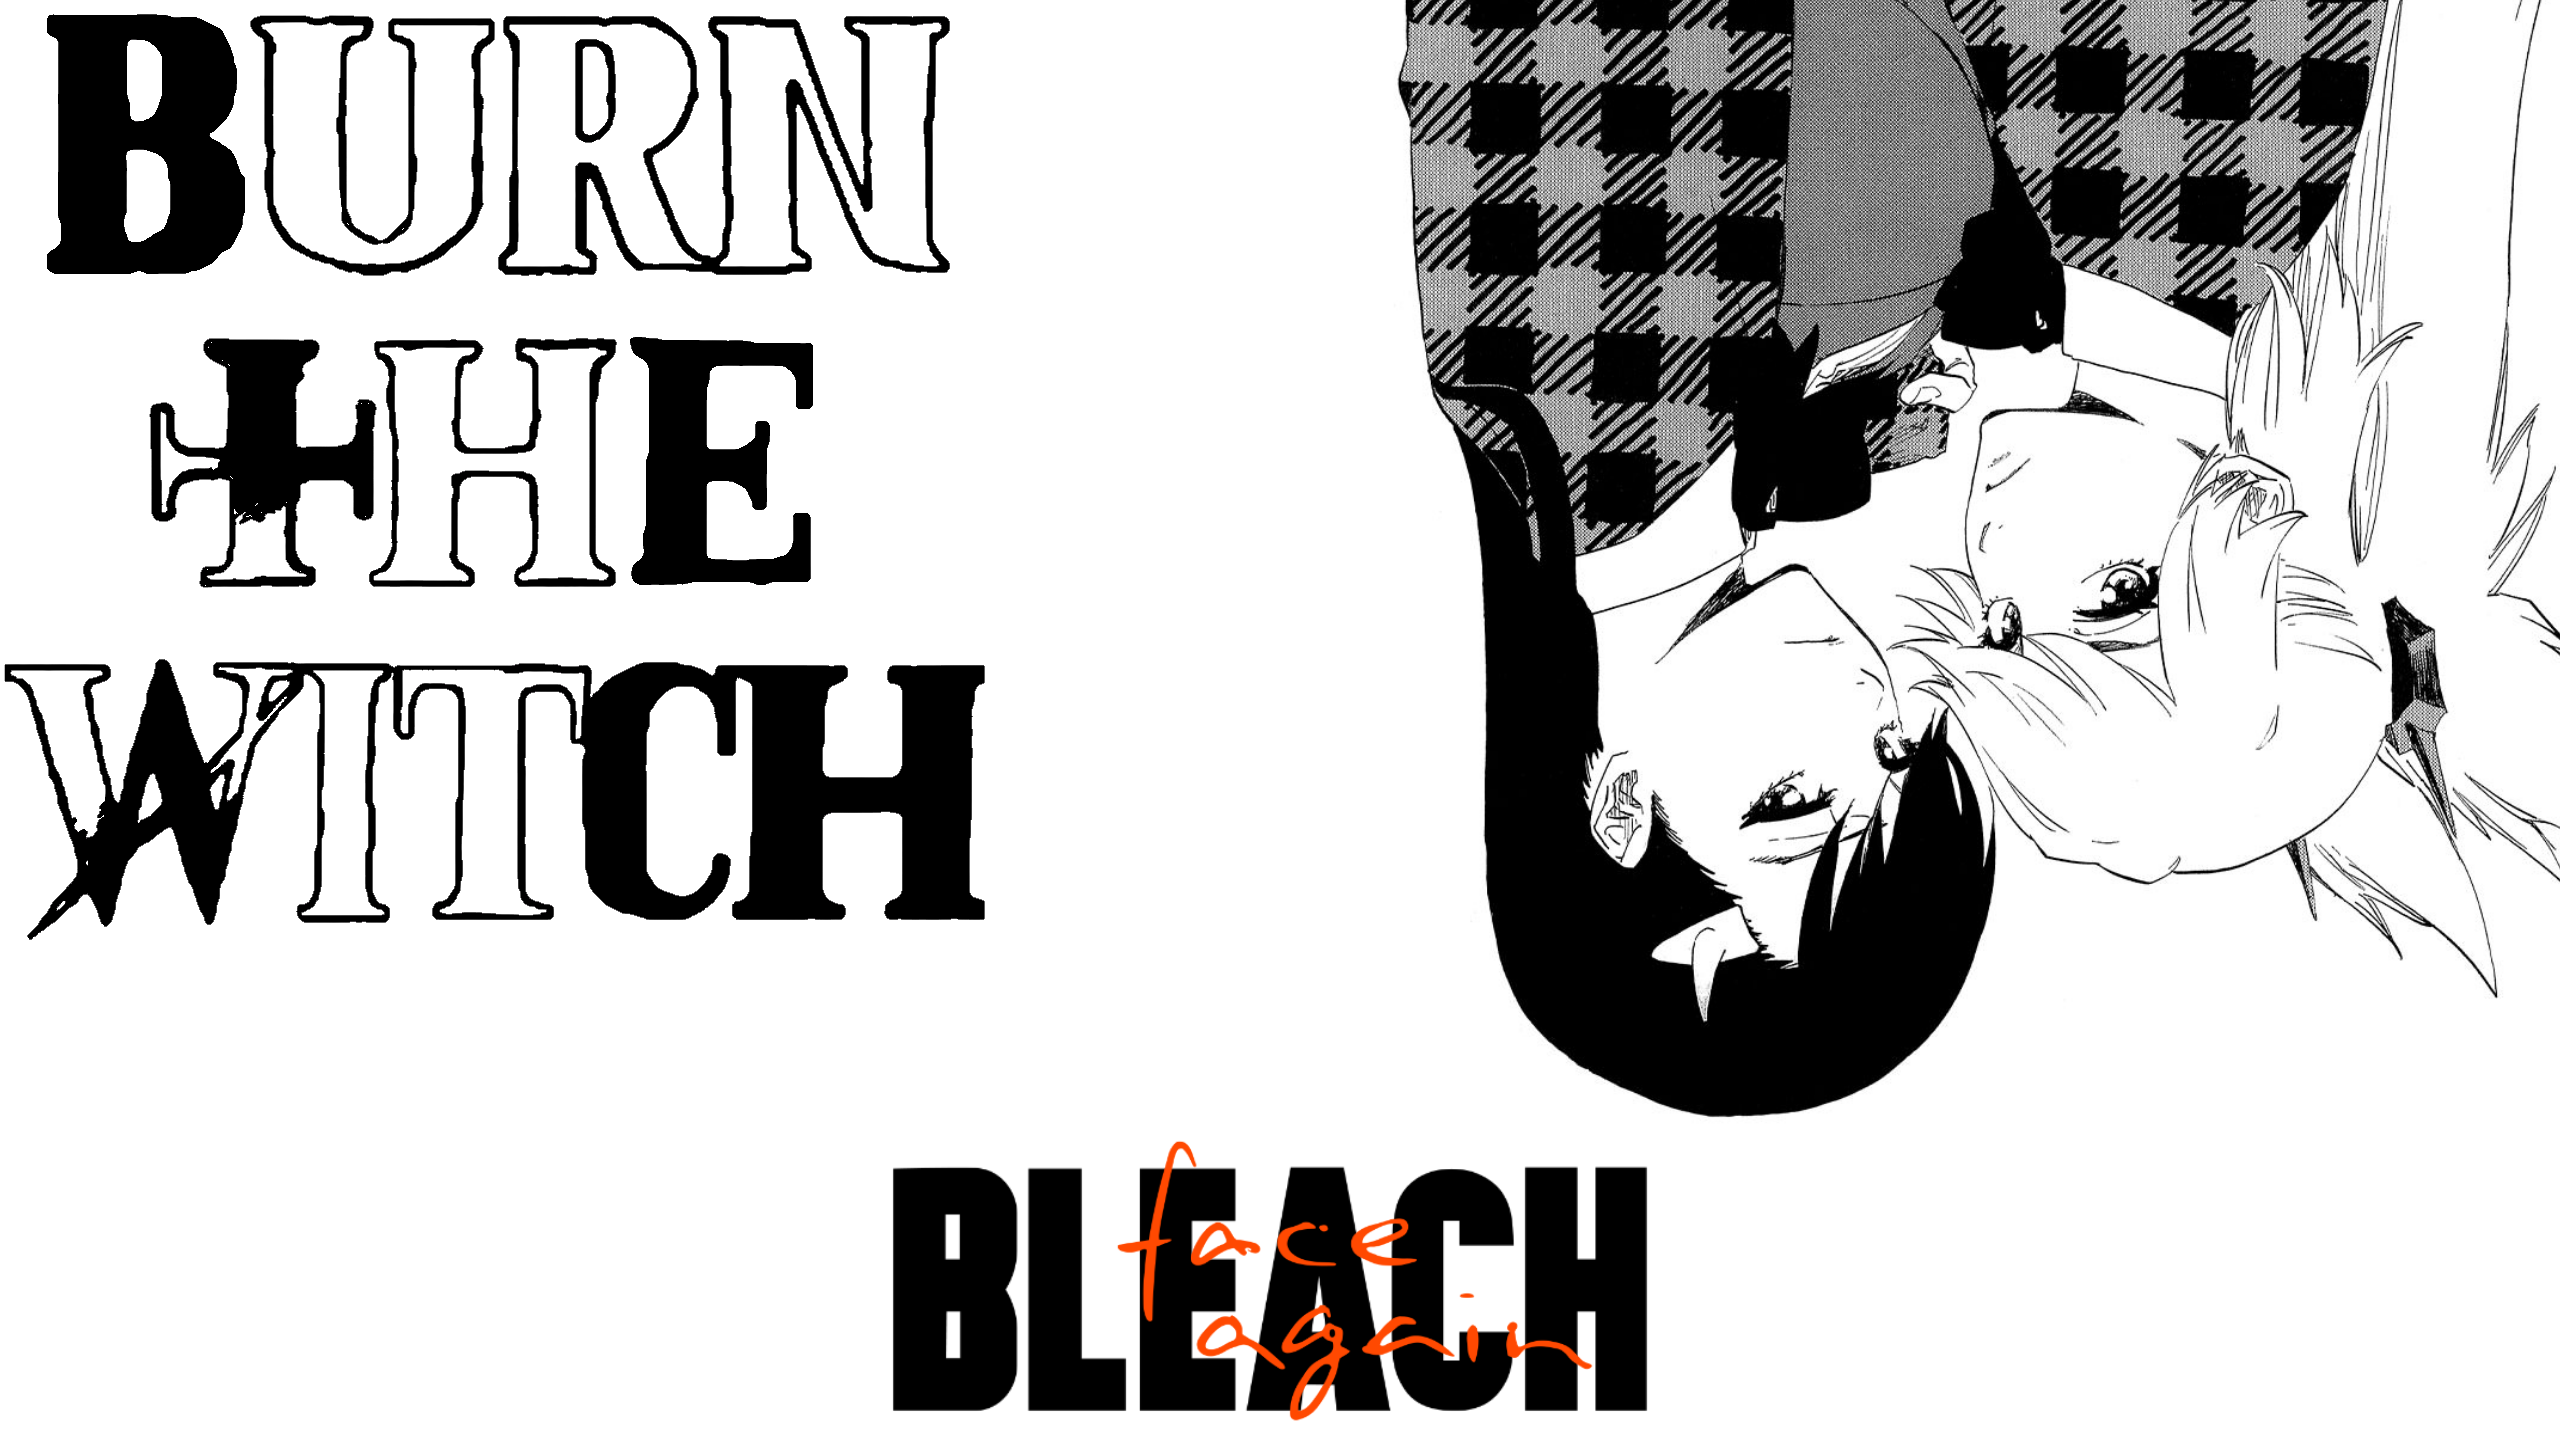 Made A PC Wallpaper Edit With The Burn The Witch Image FromThe Face Again Website